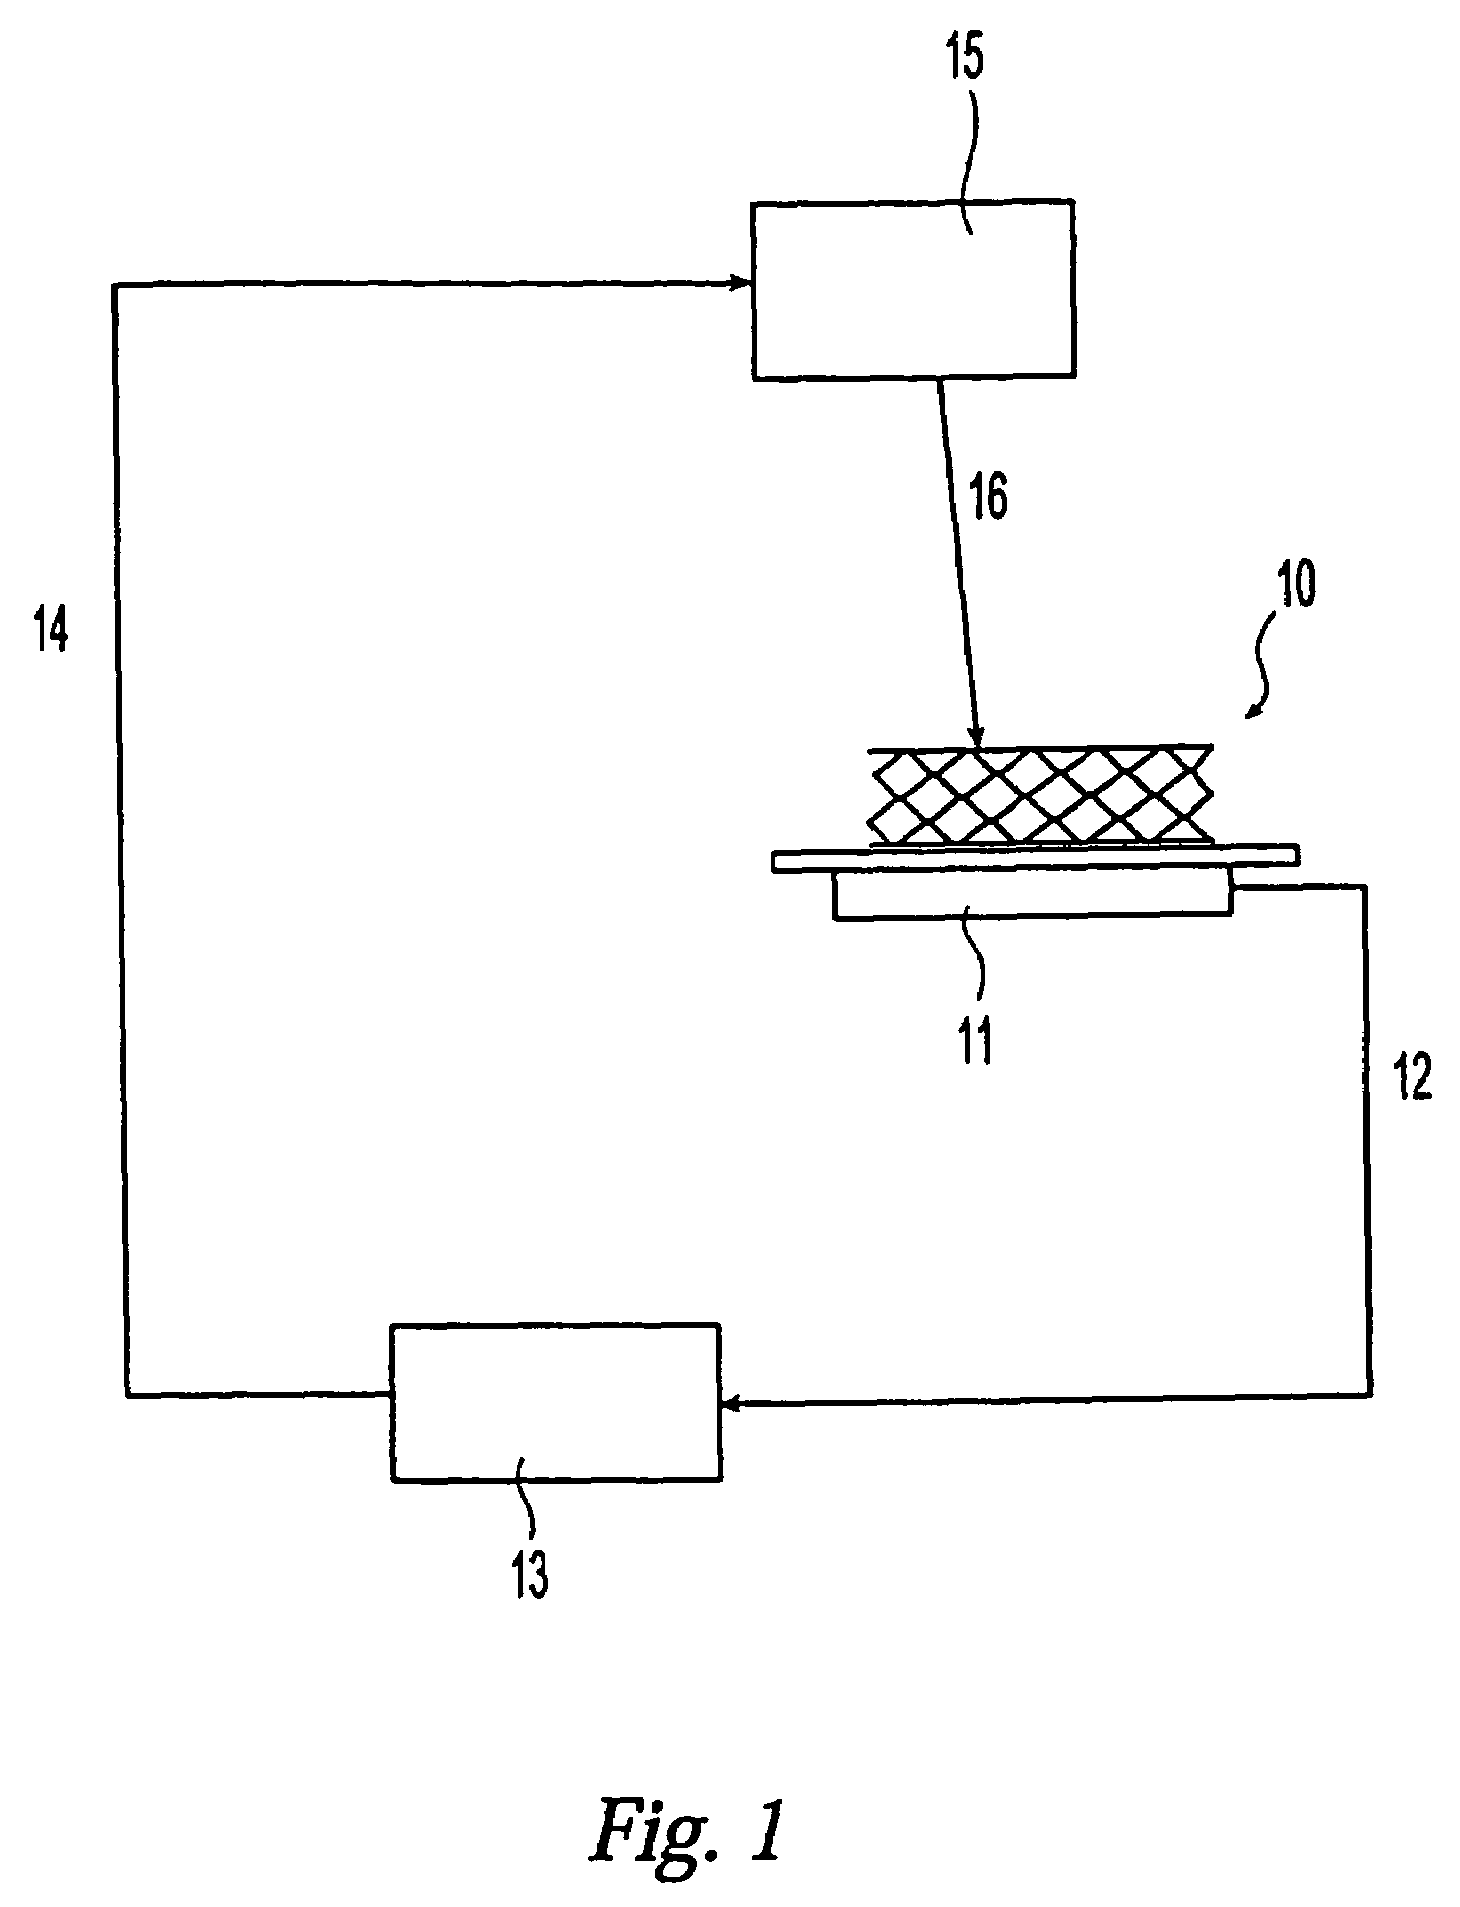 Method for making and measuring a coating on the surface of a medical device using an ultraviolet laser